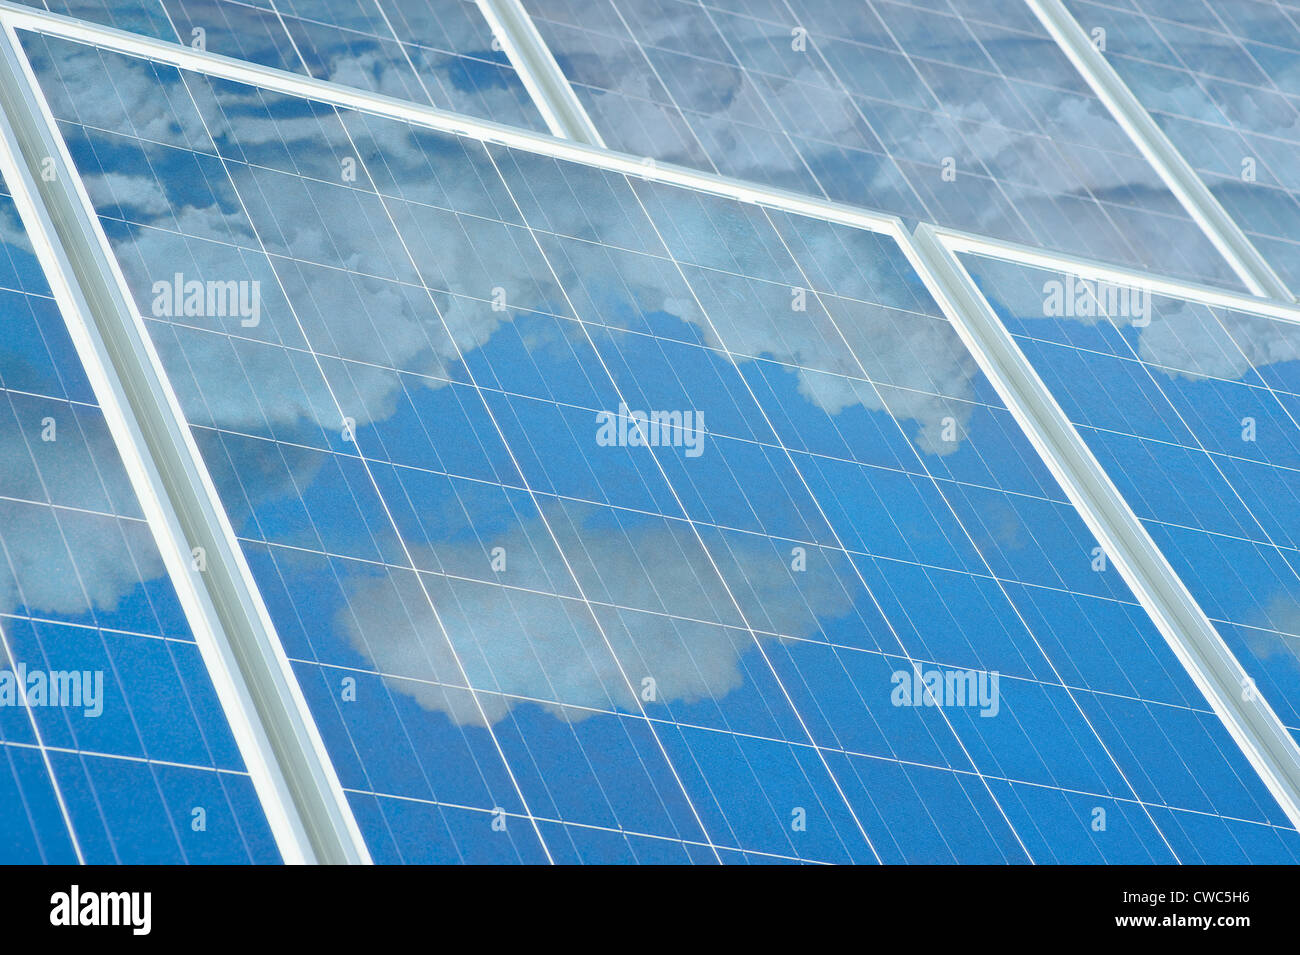 Cloud Reflection In Solar Panels Stock Photo